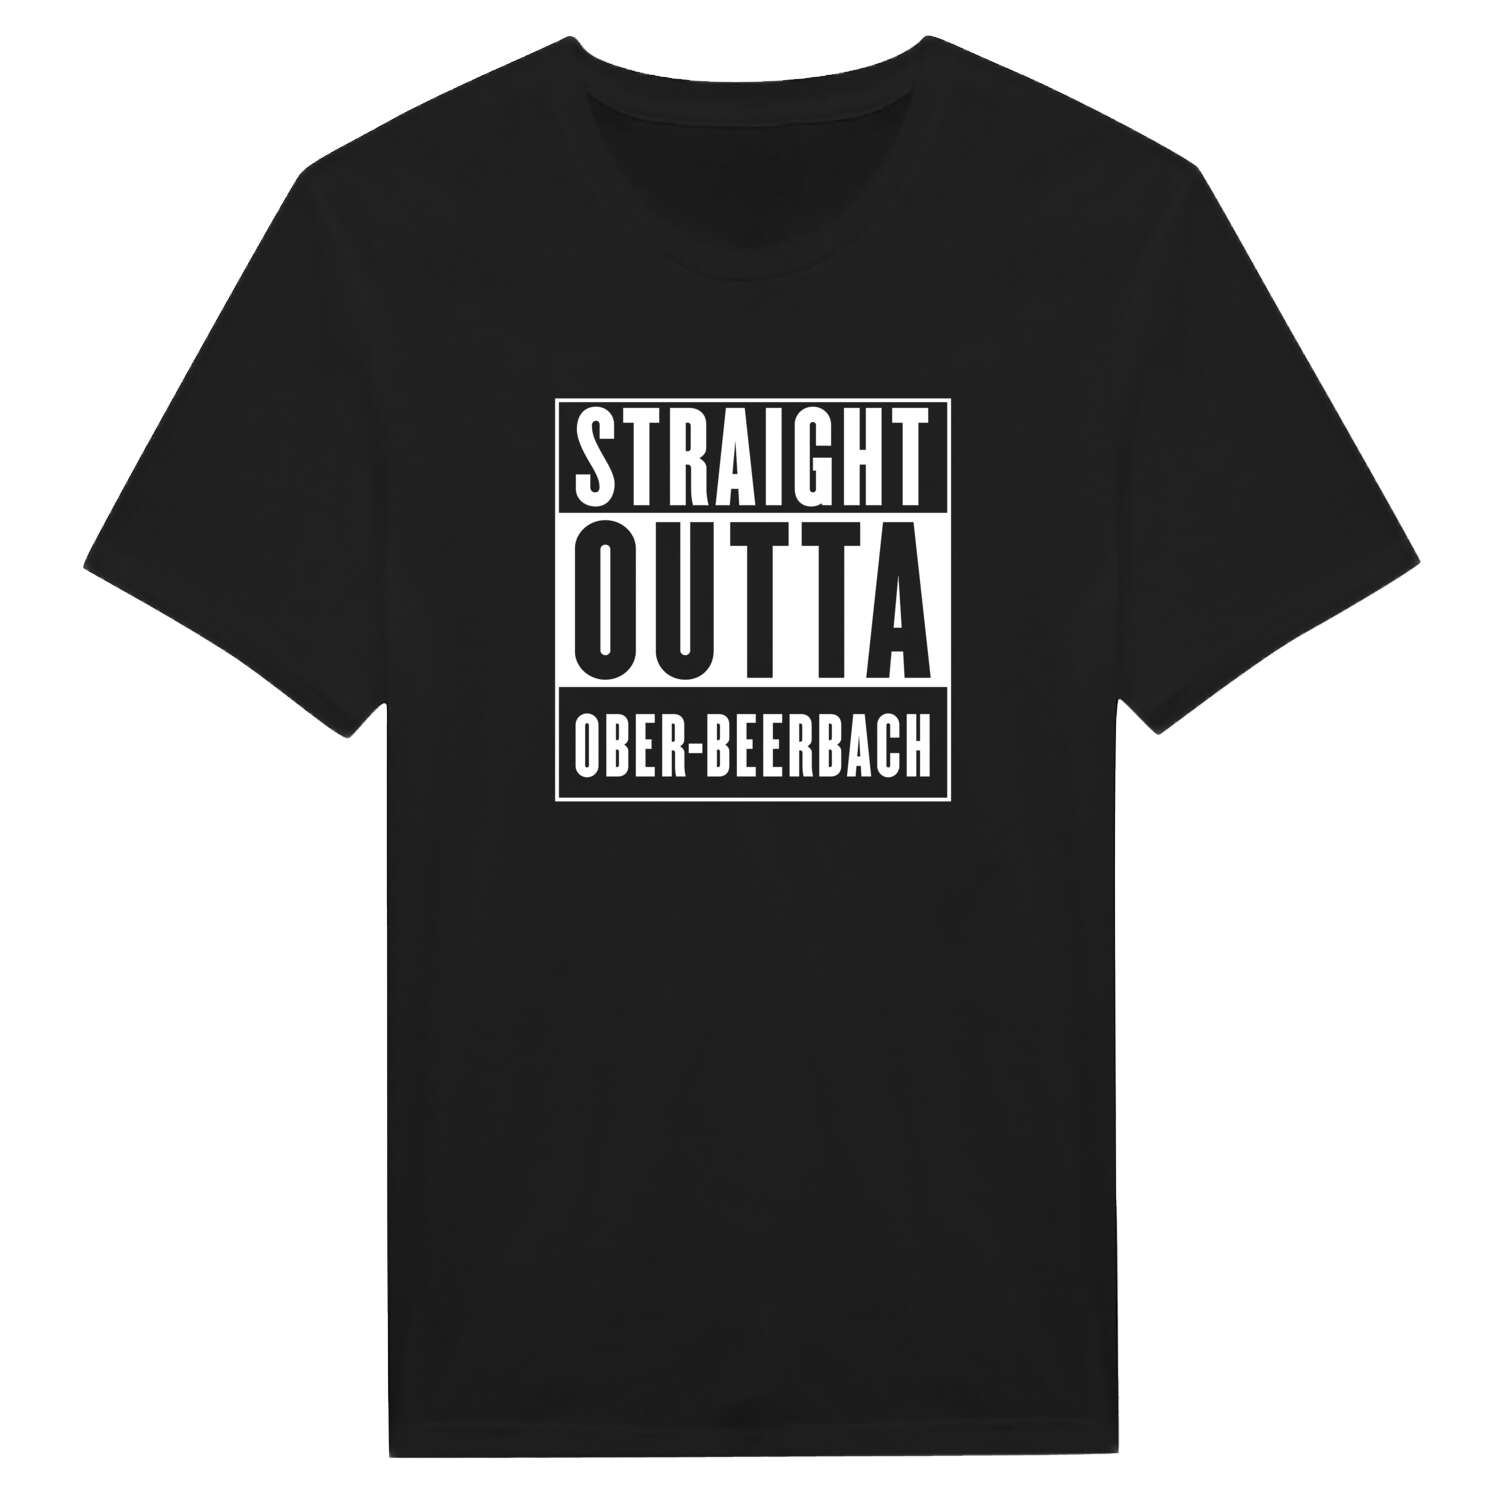 Ober-Beerbach T-Shirt »Straight Outta«